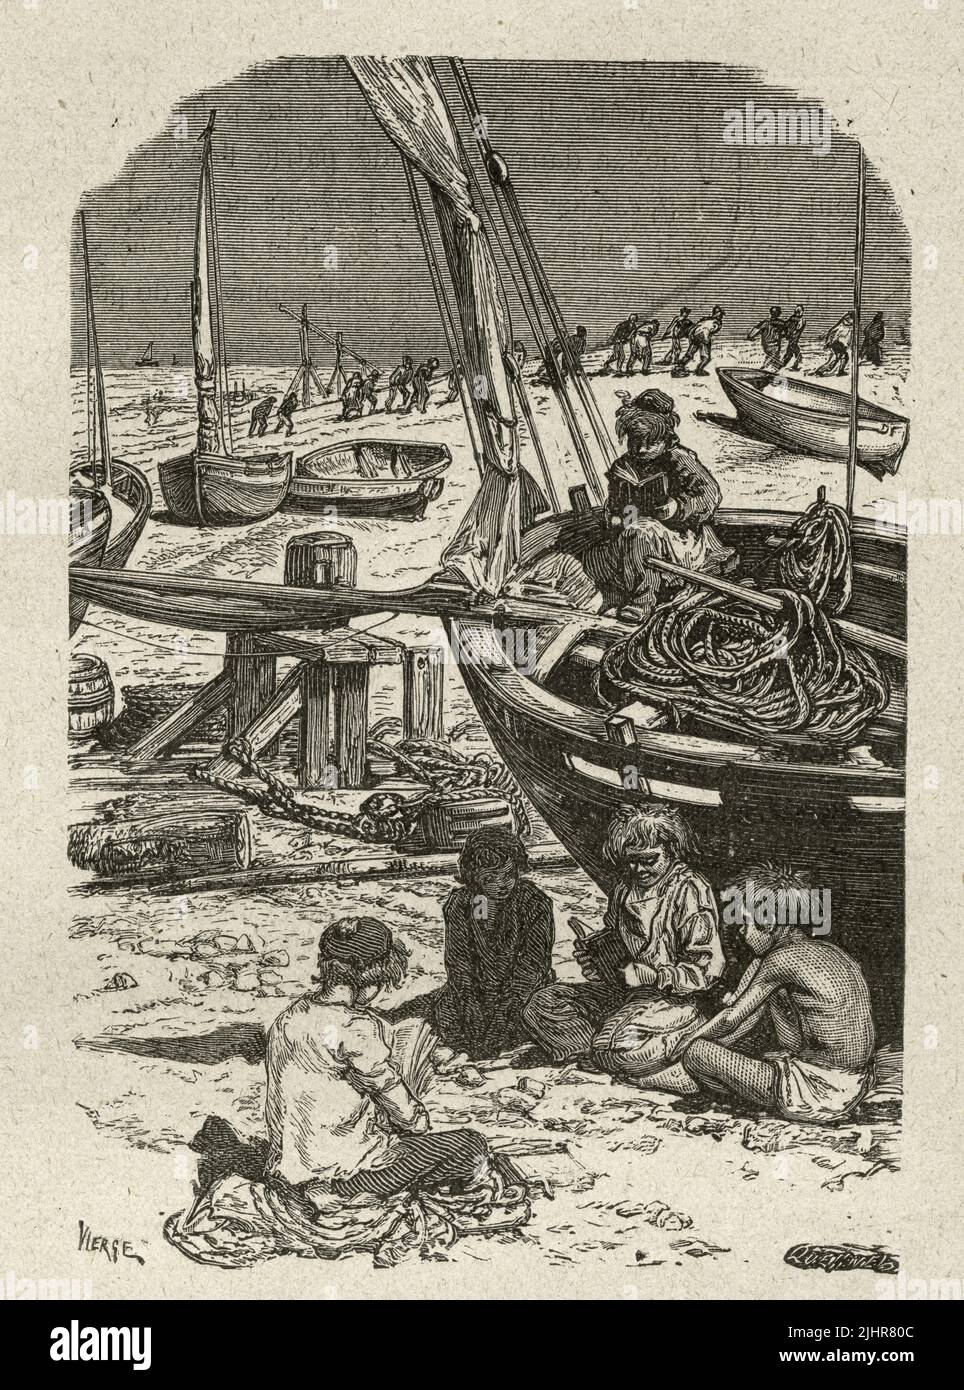 On the beach: 'On Sundays, little cabin-boys may be seen in those parts, seated upon a coil of ropes, reading, with book in hand.' First part, Book II, chapter II.  Illustrator: Daniel Vierge. Illustration from a set of nearly 150 woodcuts published in the Volume XI of Victor Hugo's 'Oeuvres Complètes' including 'Les Travailleurs de la Mer' ('Toilers of the Sea') - written in 1866. Book published in 1906 by the Société d'éditions Littéraires et Artistiques, Librairie Paul Ollendorff. Stock Photo